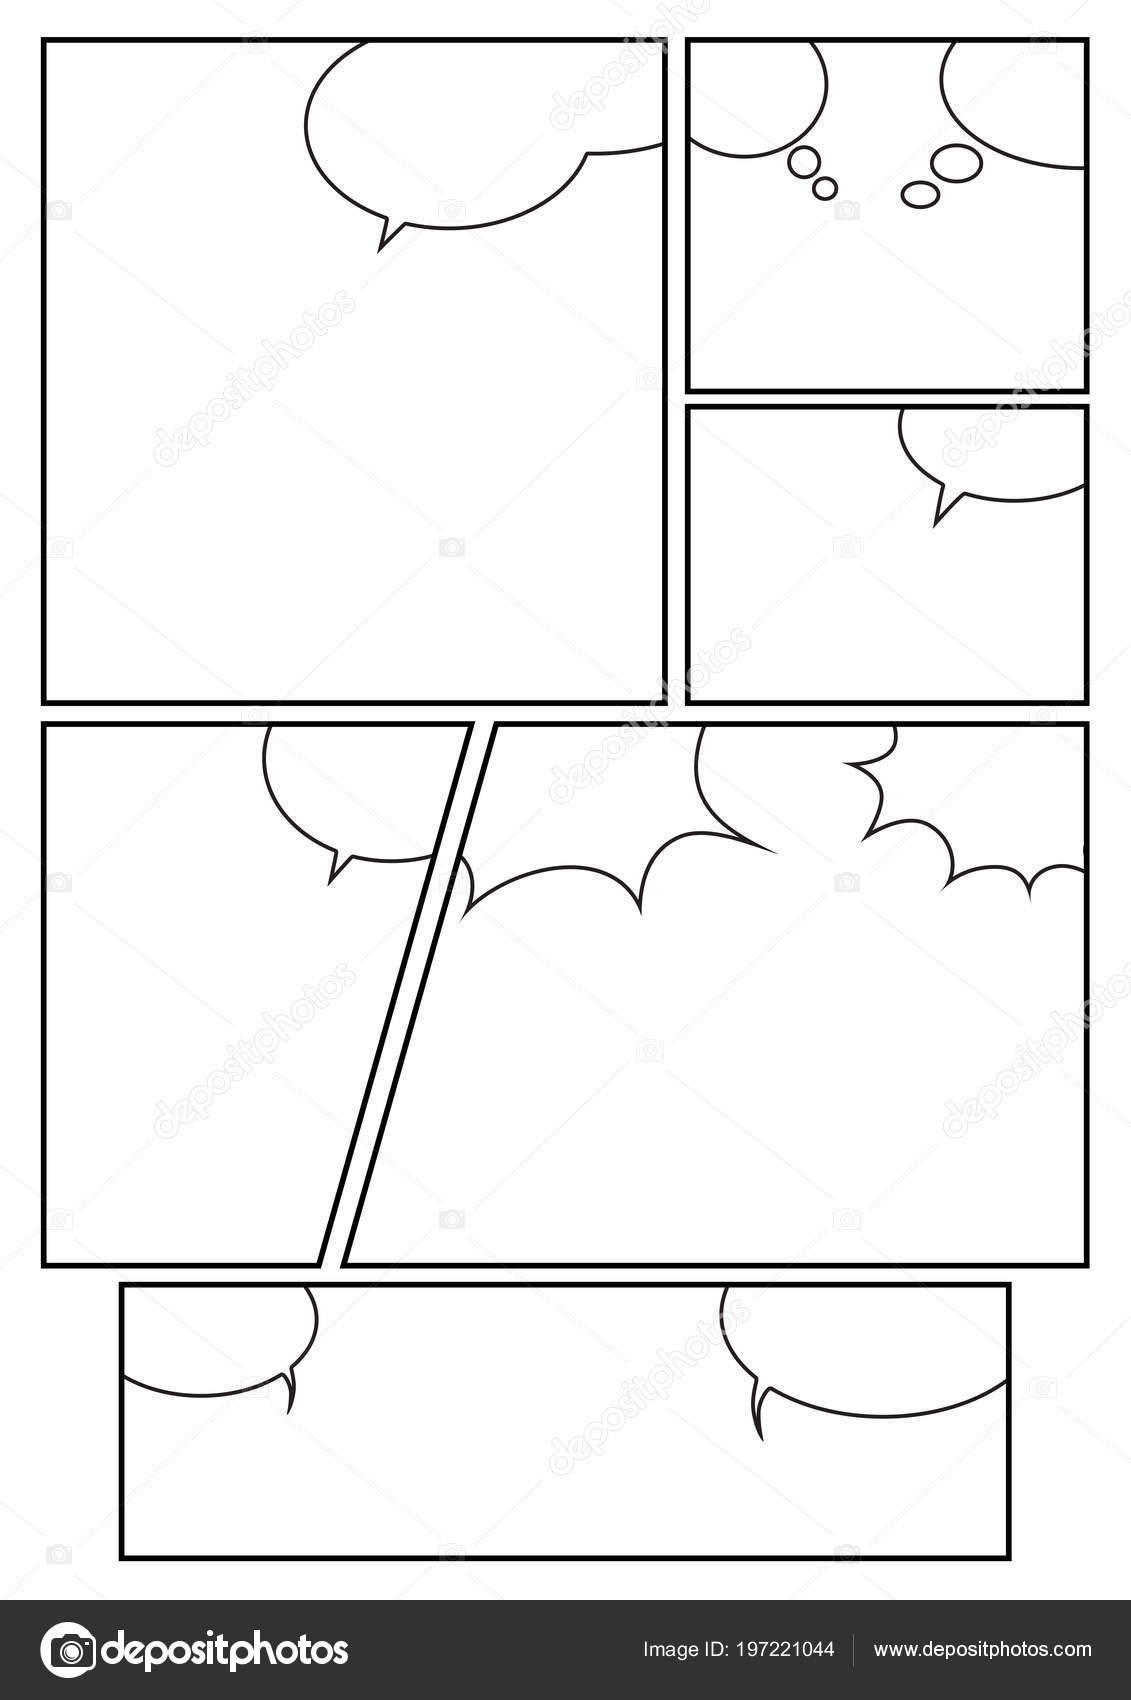 Manga Storyboard Layout Template Rapidly Create Stock Vector (Royalty Free)  1099431896